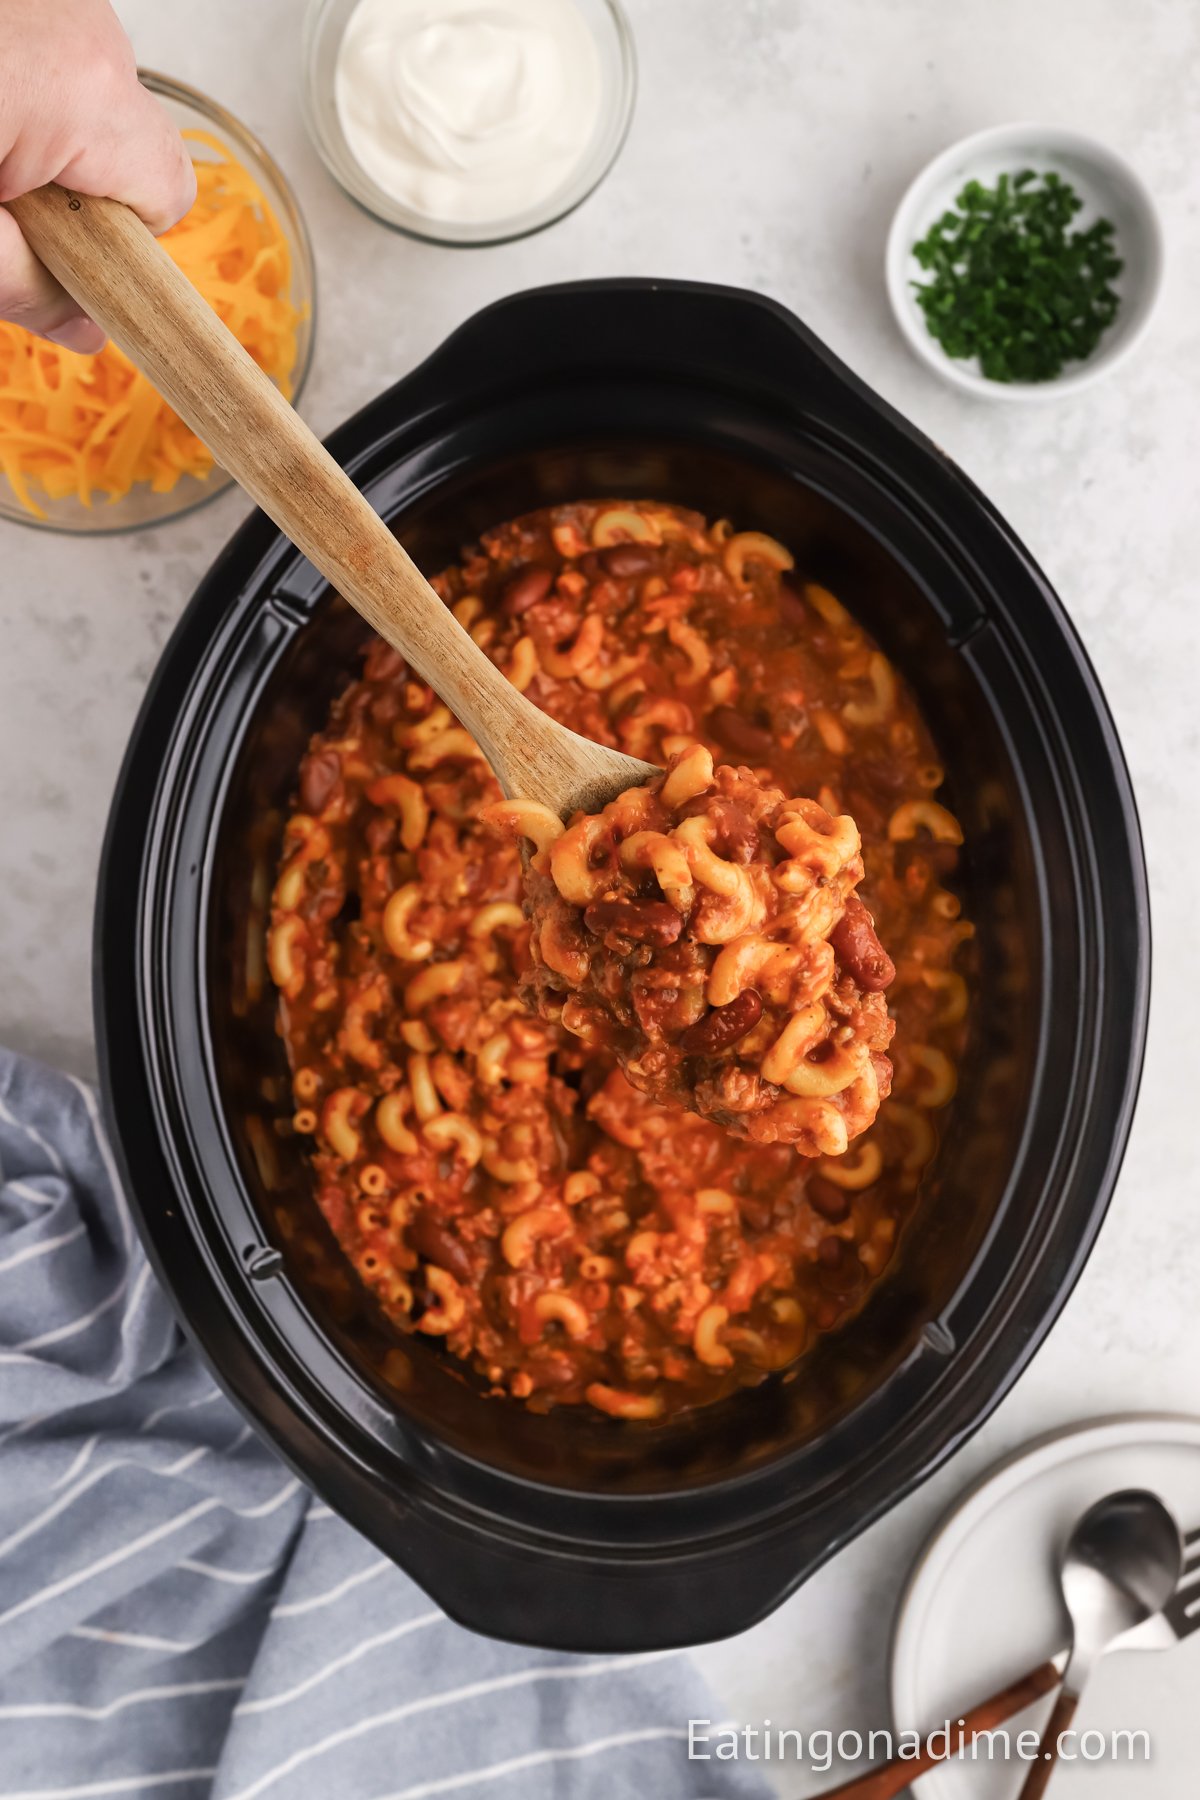 Chili Mac and Cheese in the slow cooker with a wooden spoon